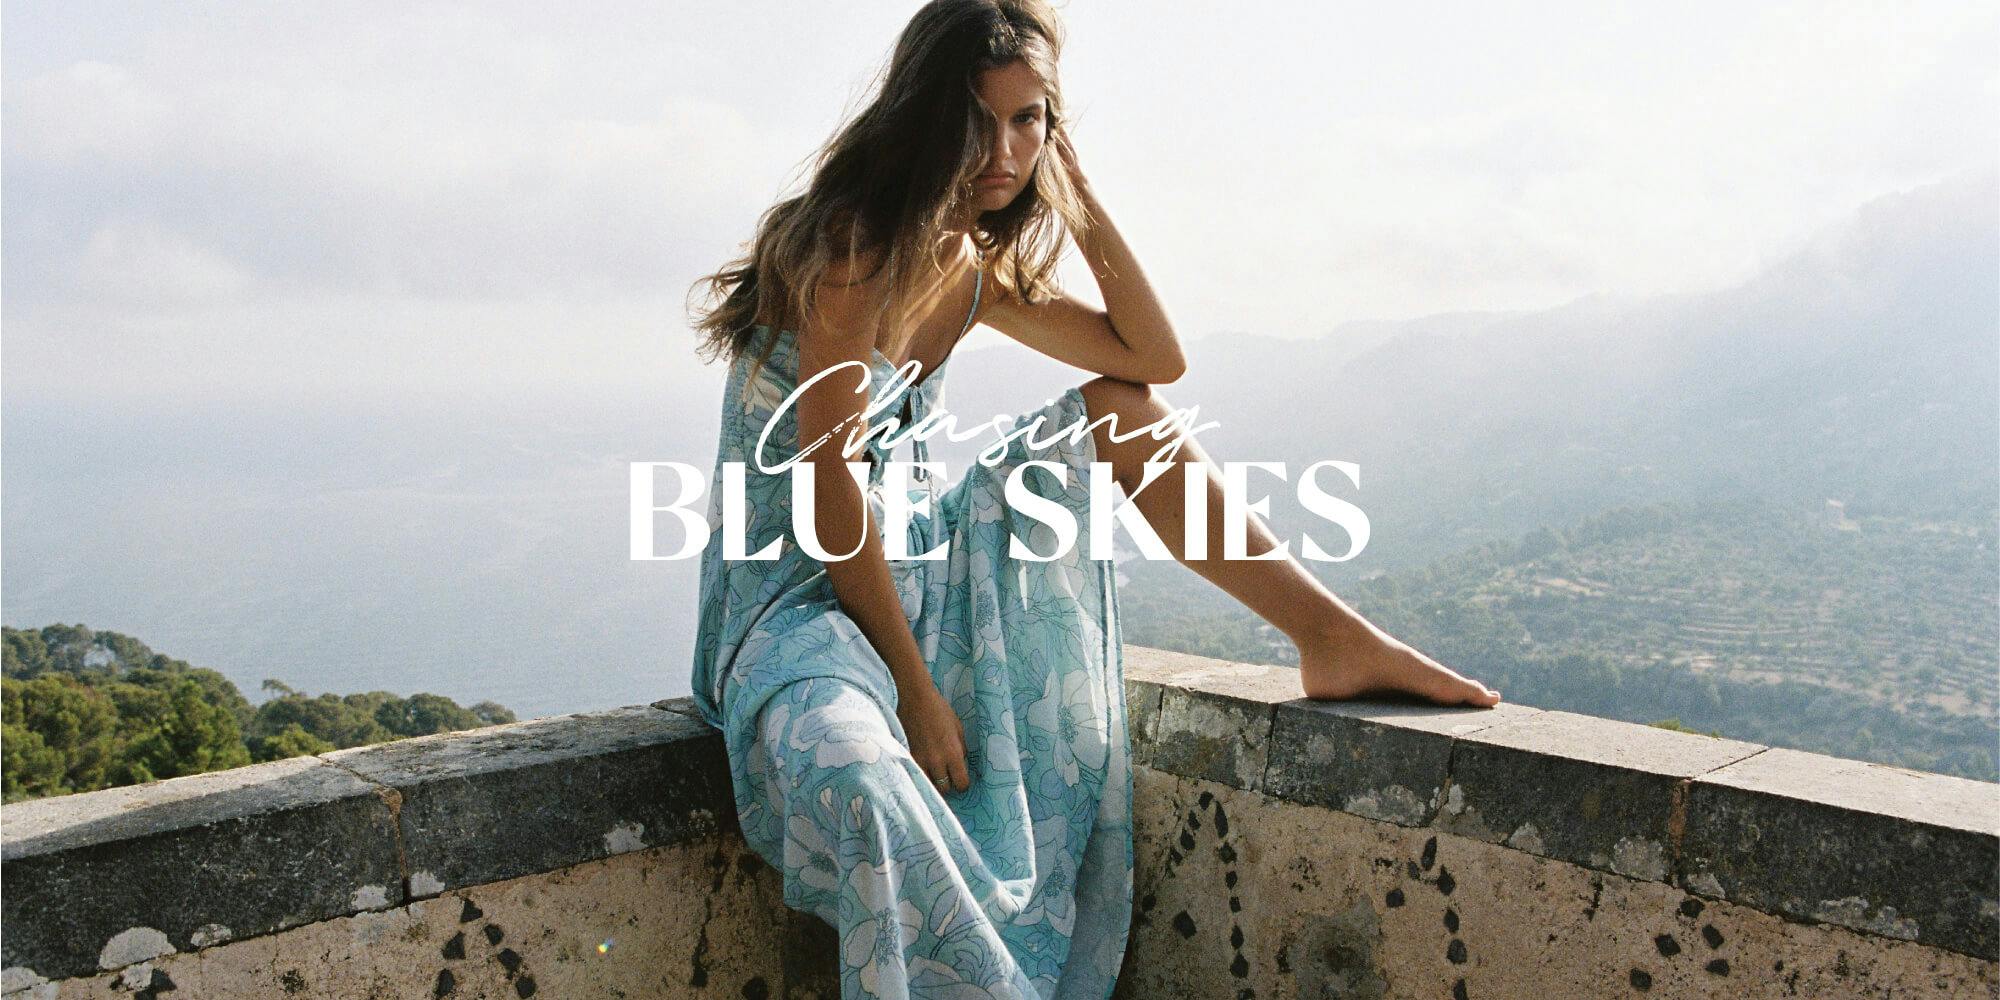 Image of female sitting on a blankly with Spain in the background, she is wearing a blue floral maxi dress. ˇext overlays reading 'chasing blue skies;